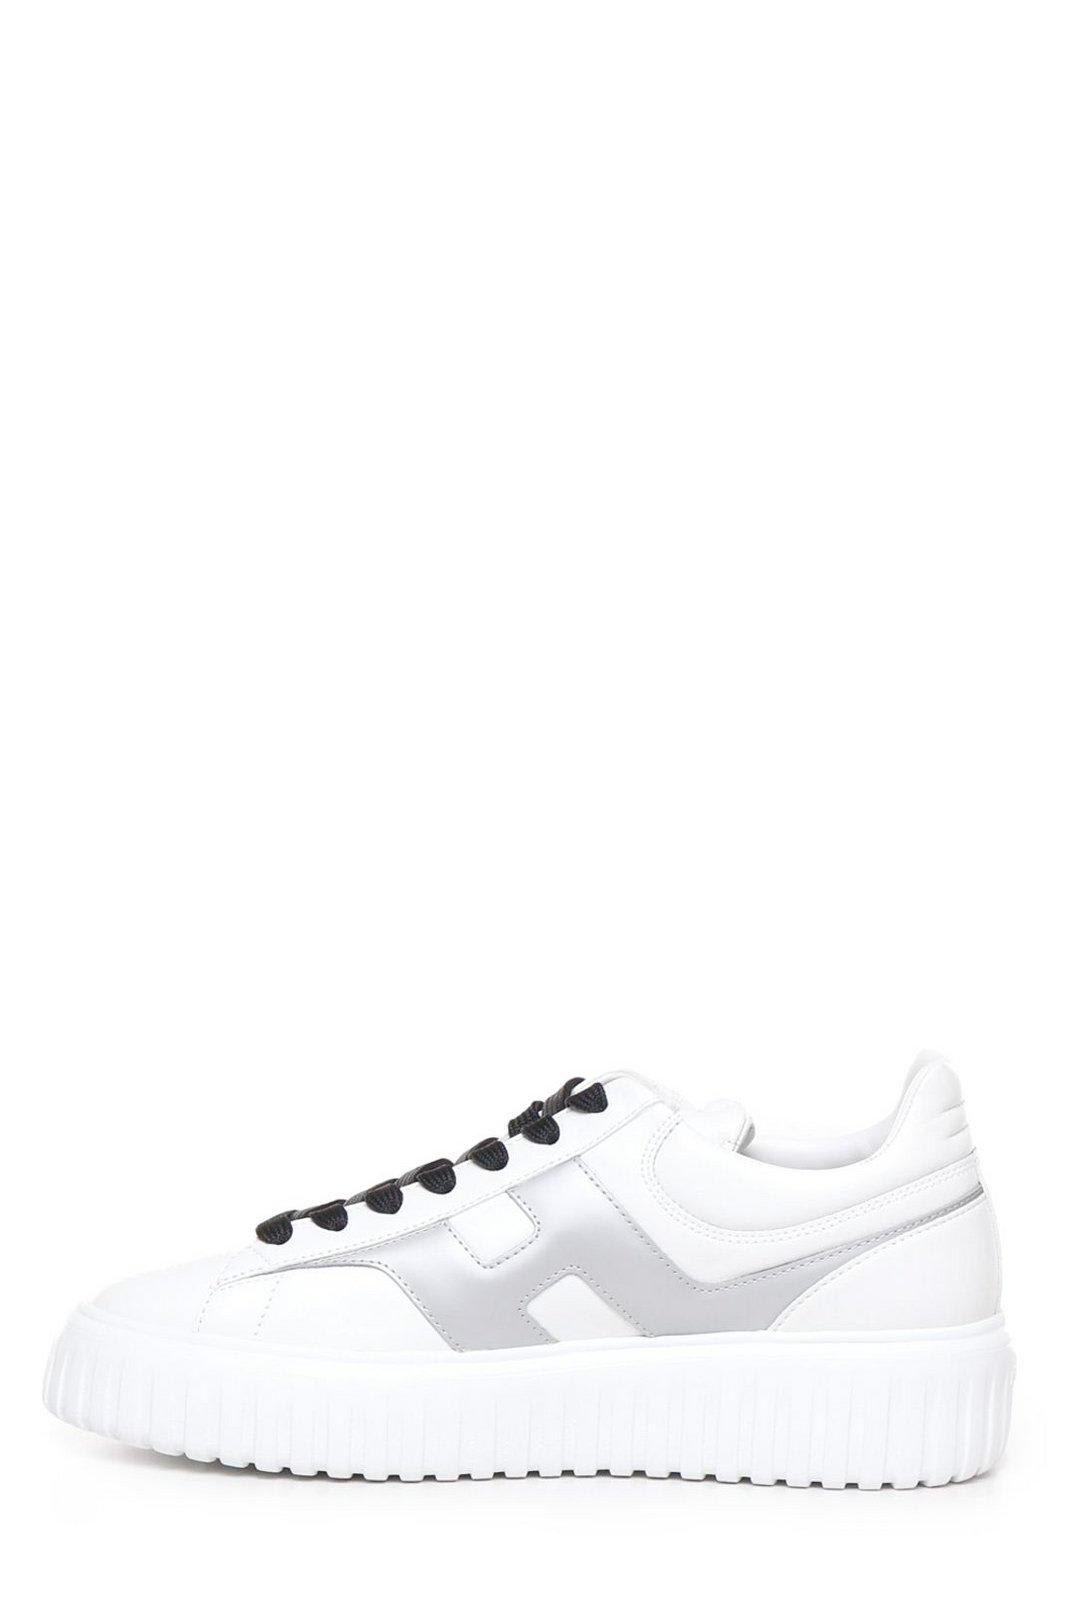 Shop Hogan H-stripes Round Toe Sneakers In White